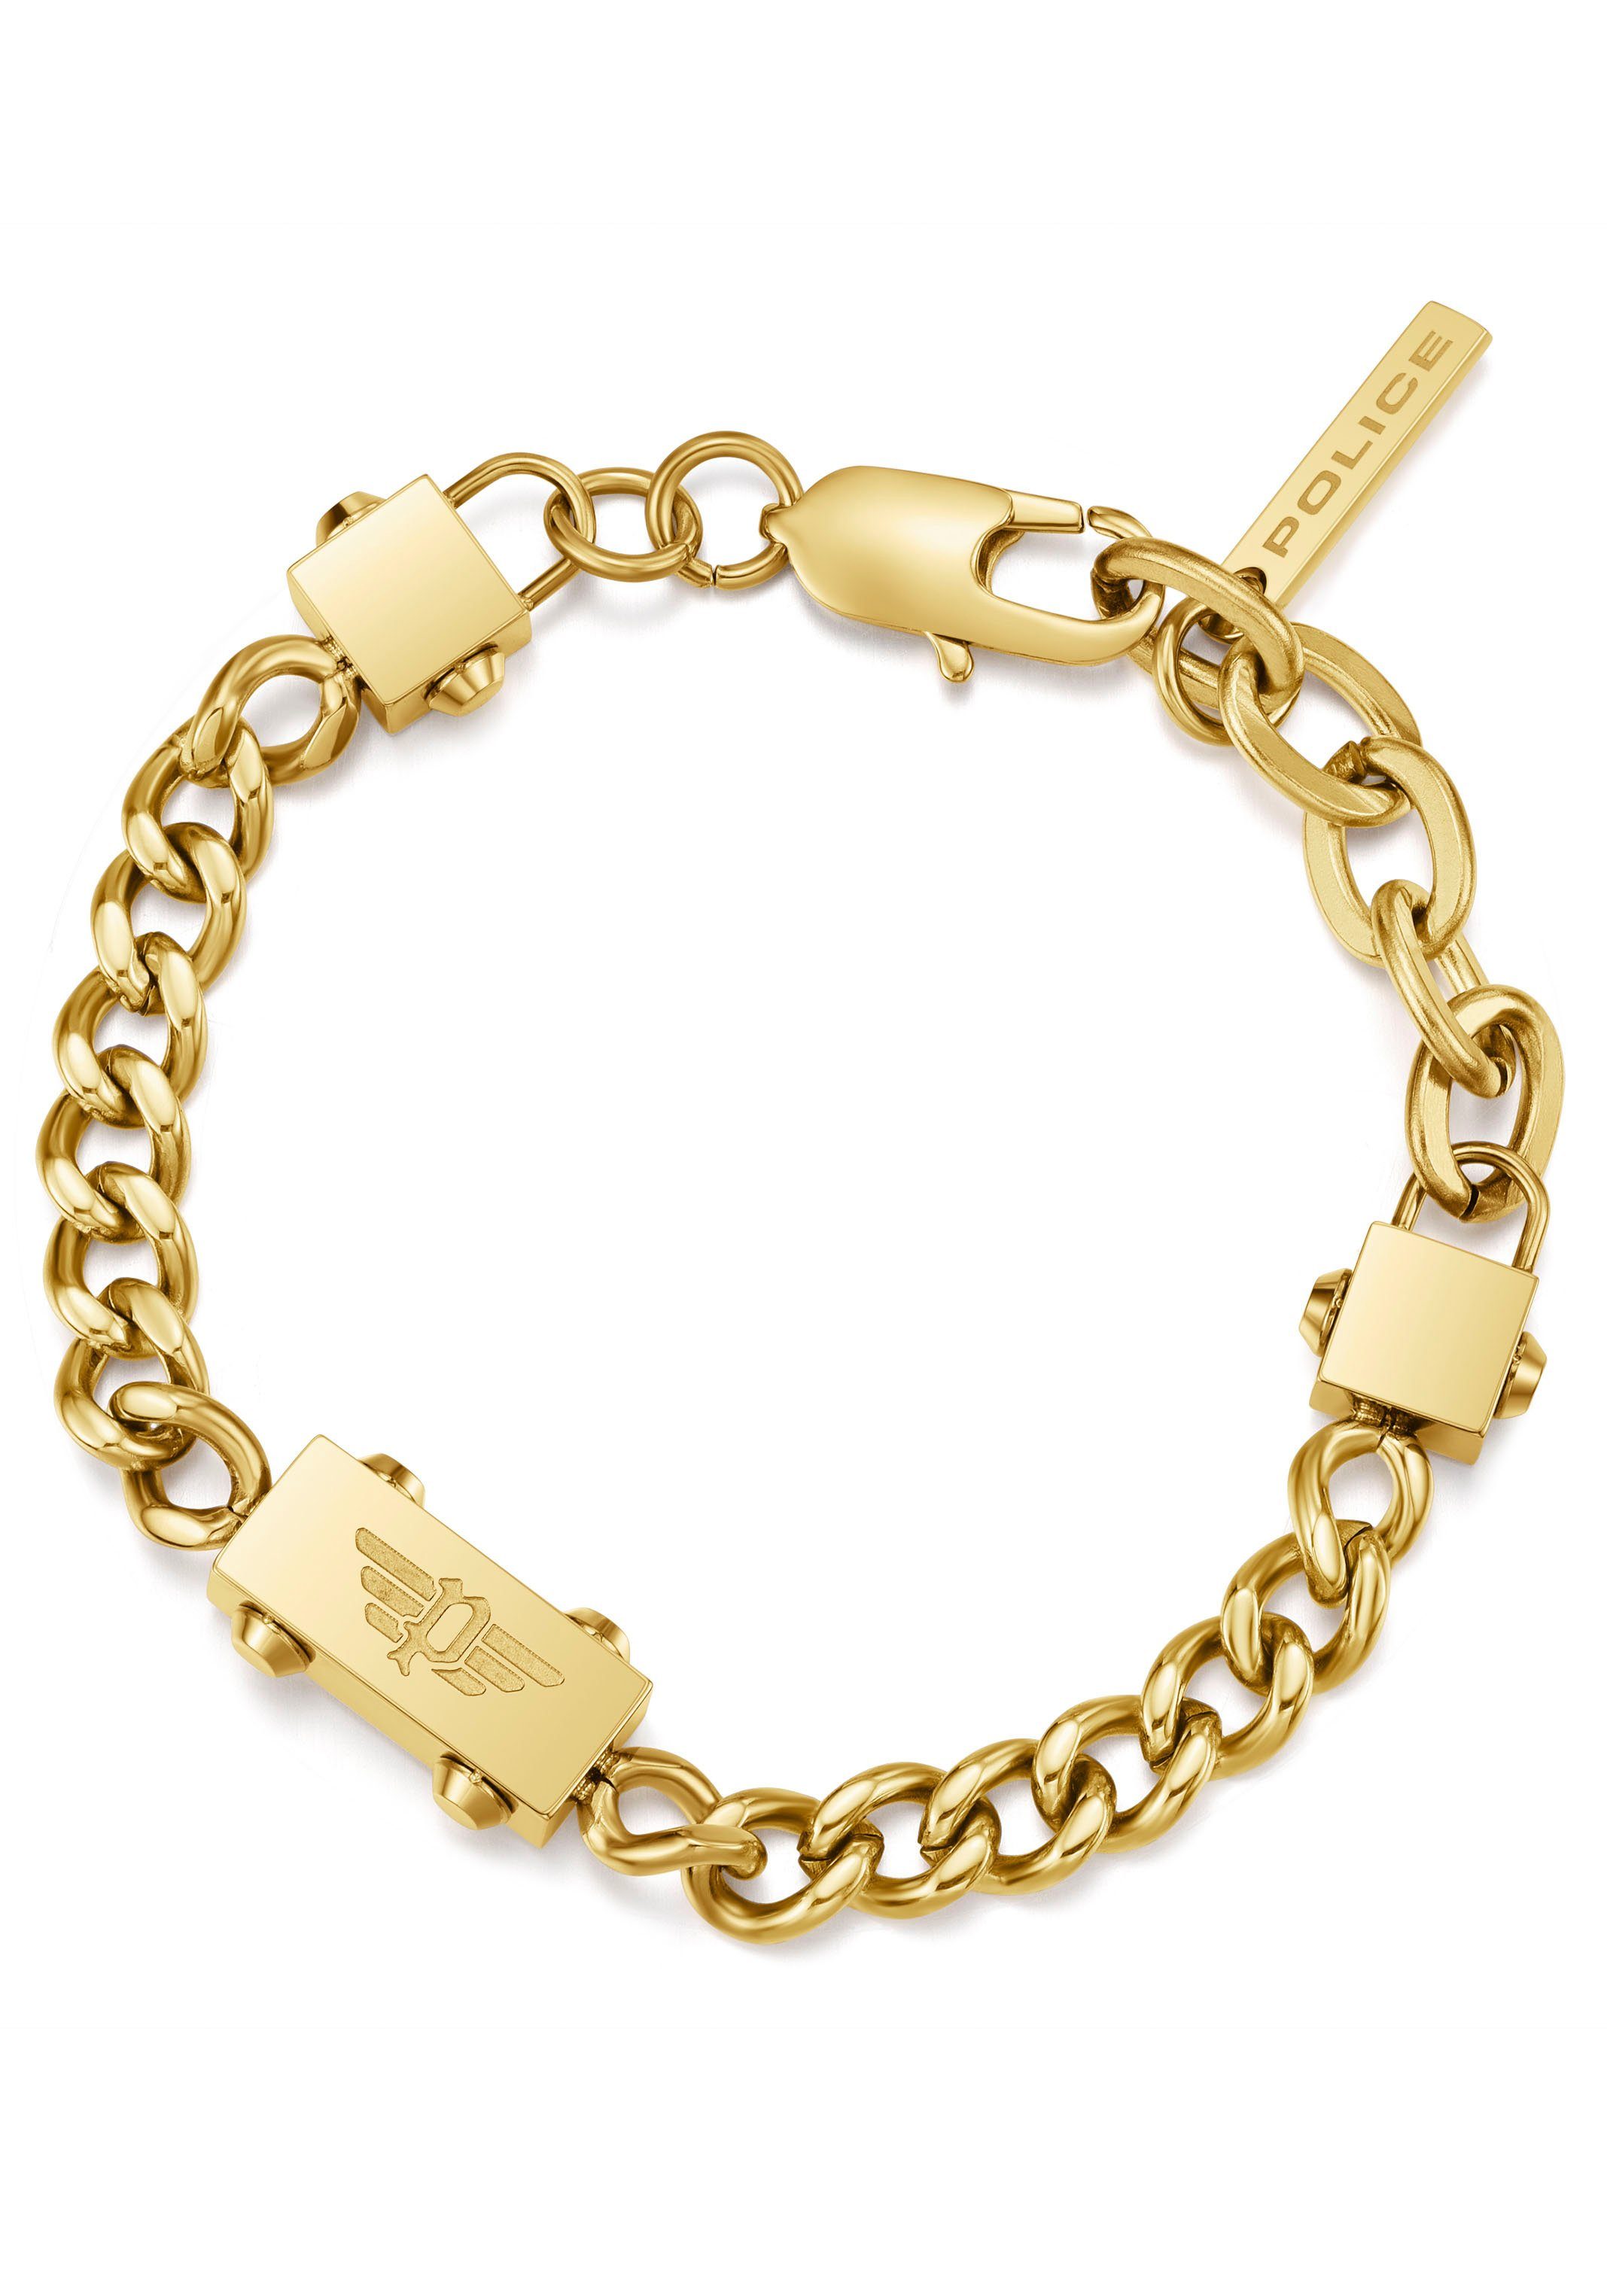 Nr. 1 in der Beliebtheit Police Armband CHAINED, PEAGB0002102, gelbgoldfarben PEAGB0002106